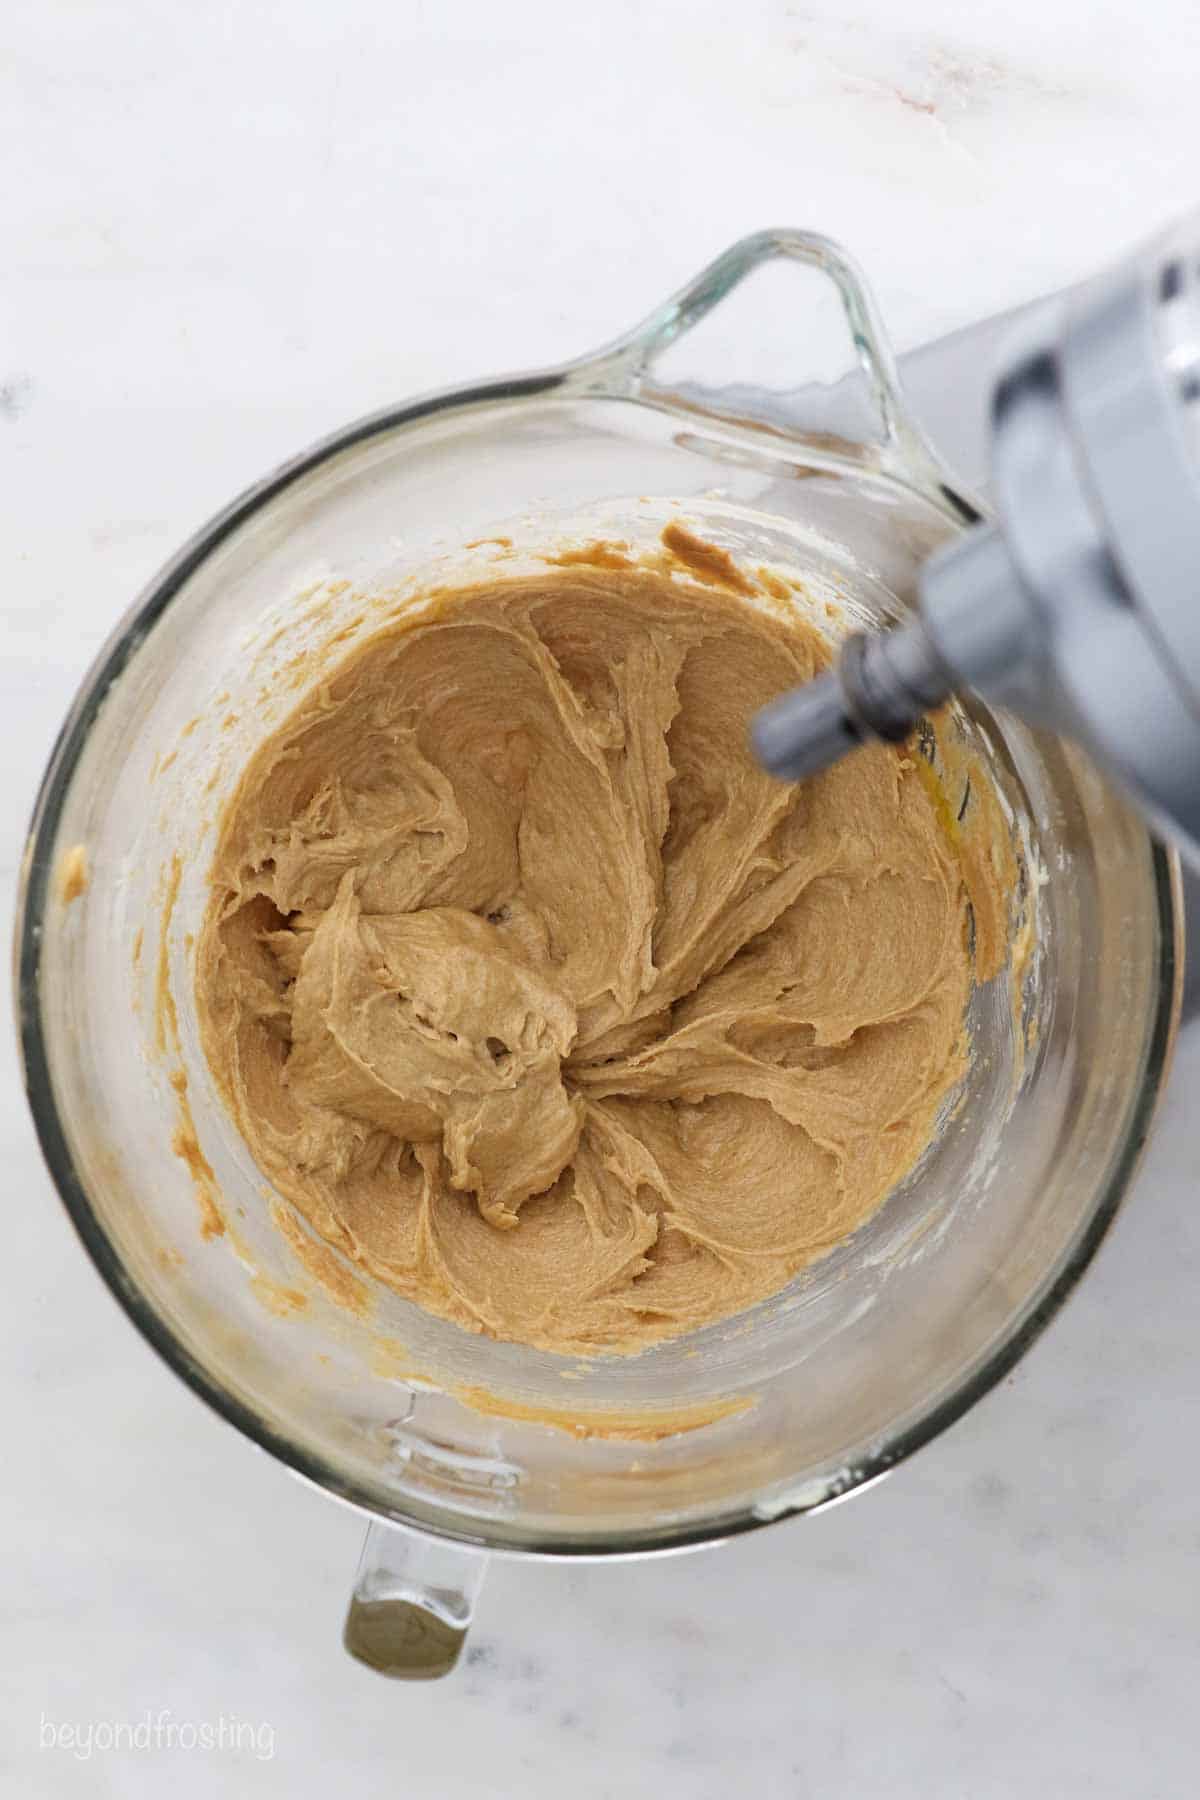 Peanut butter being creamed with sugar in a mixing bowl